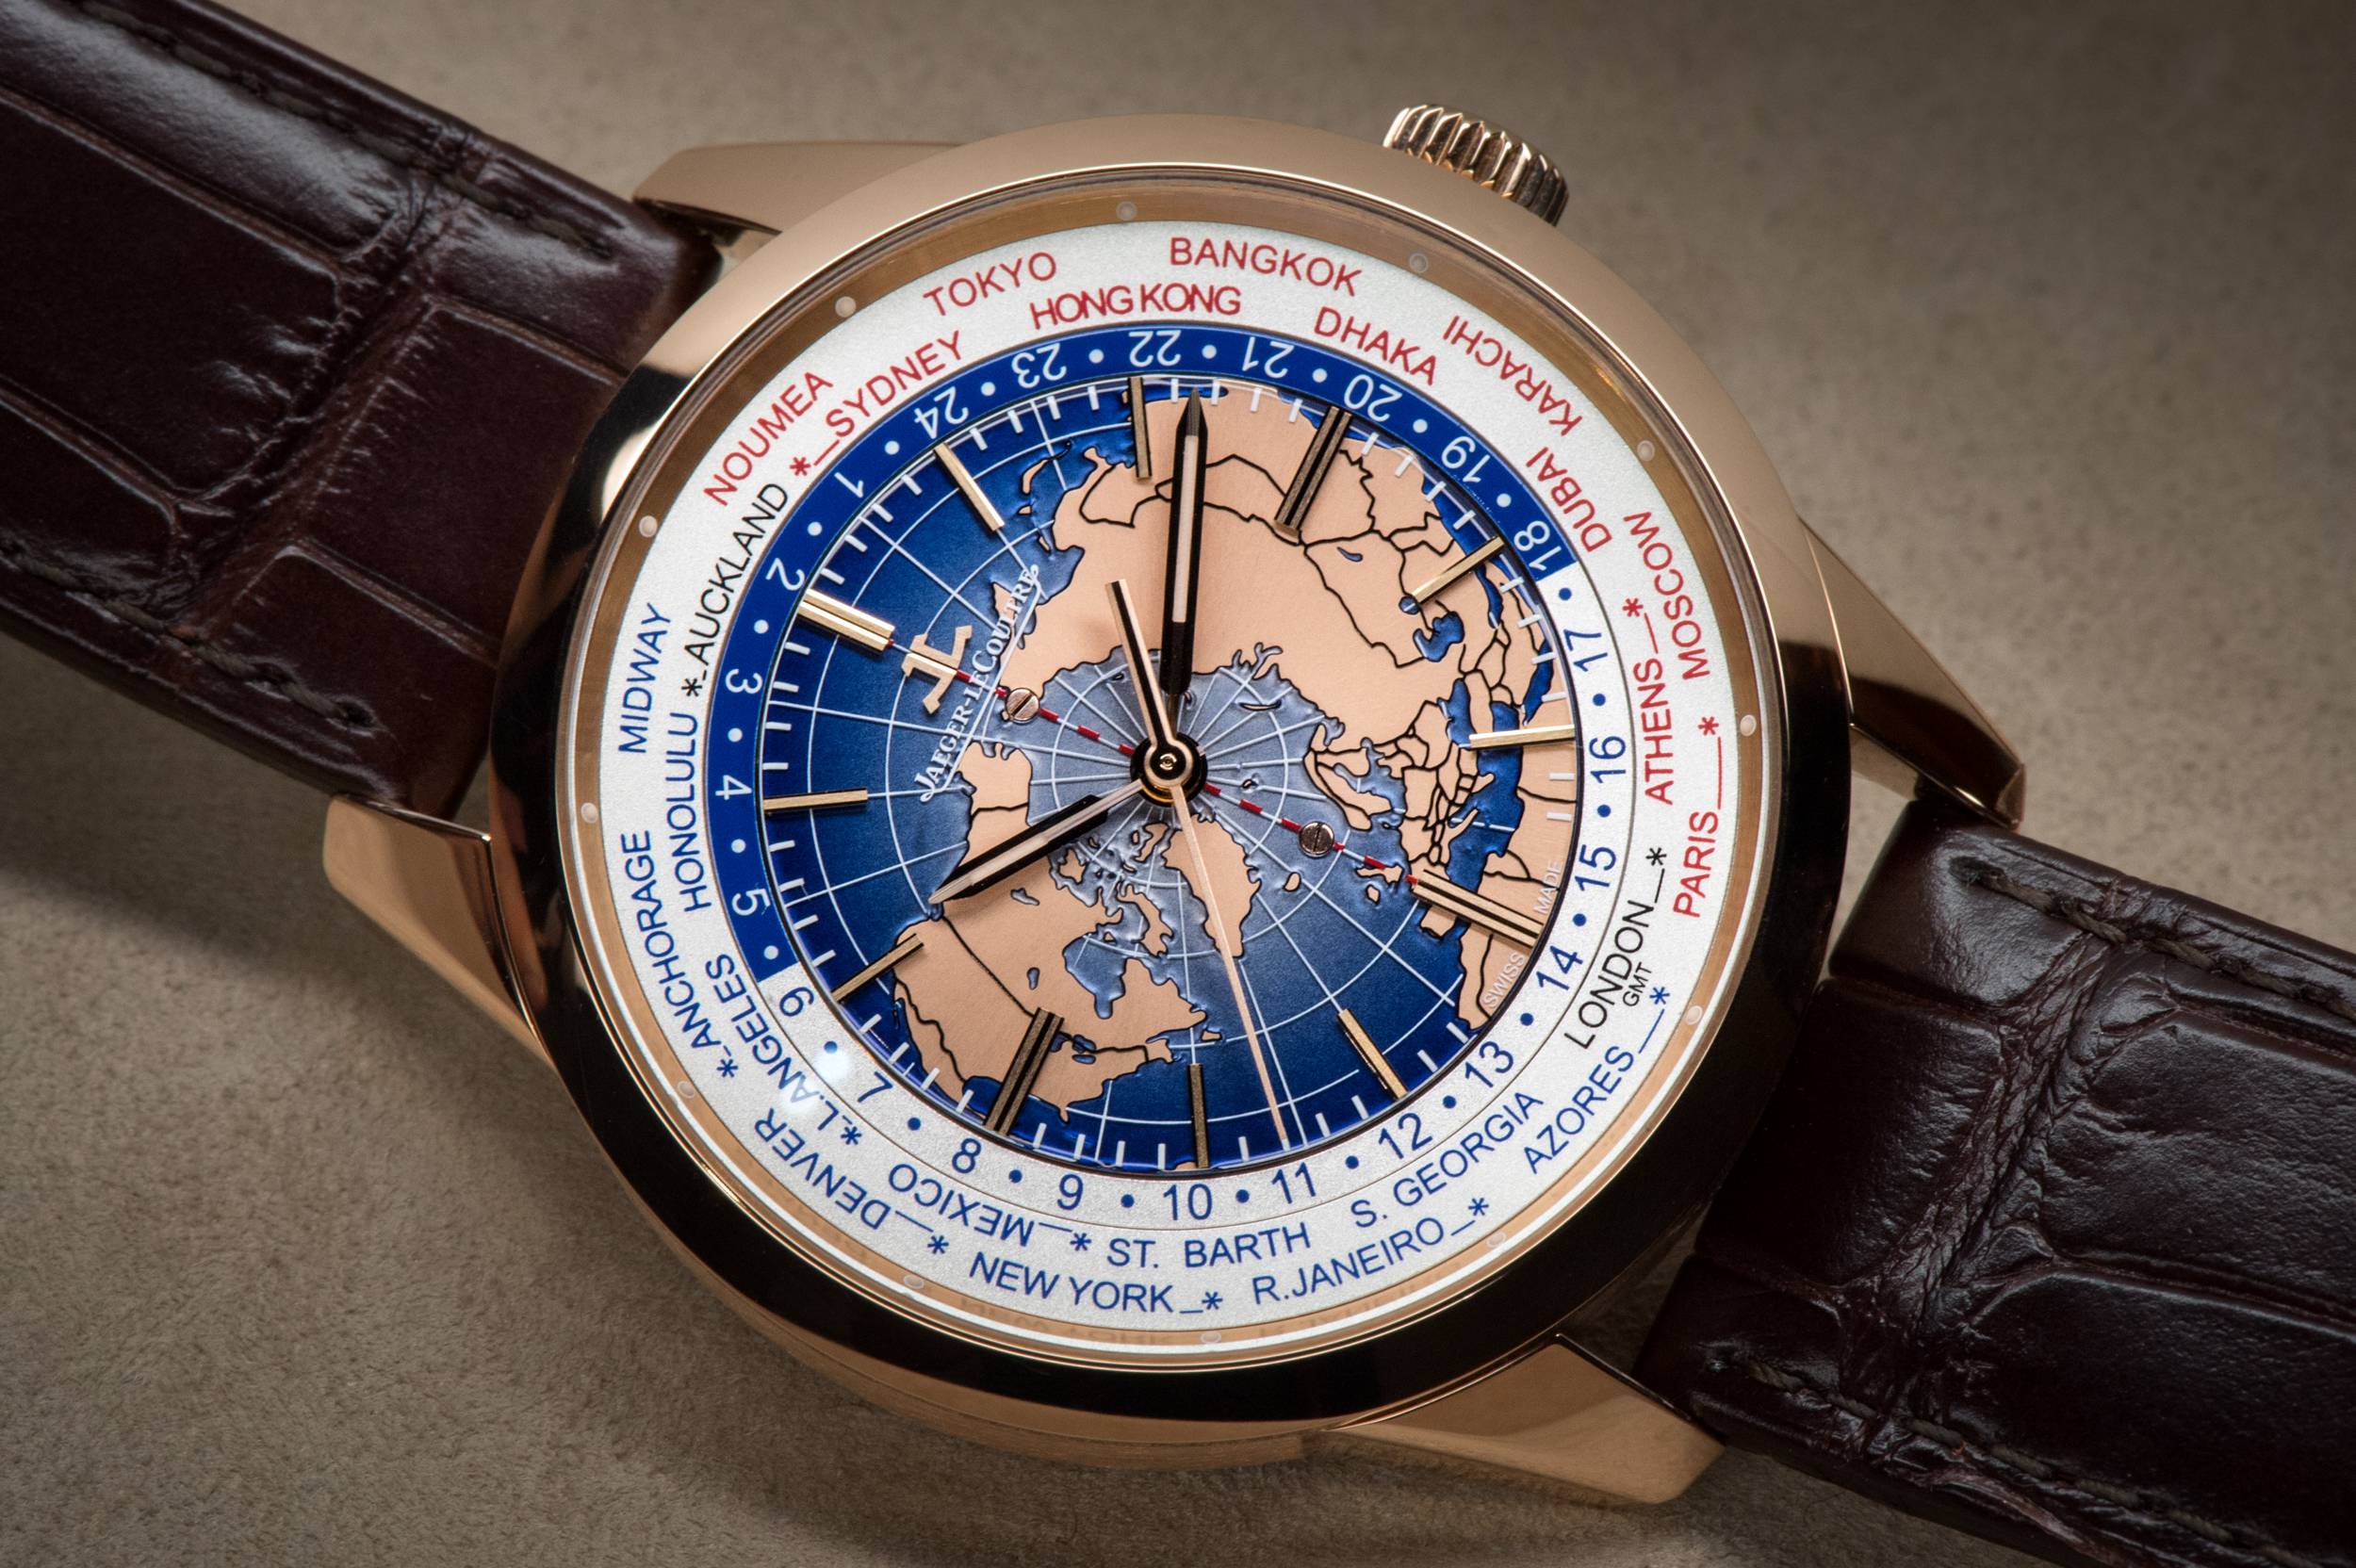 Watch of the Week: Jaeger-LeCoultre Geophysic Universal Time